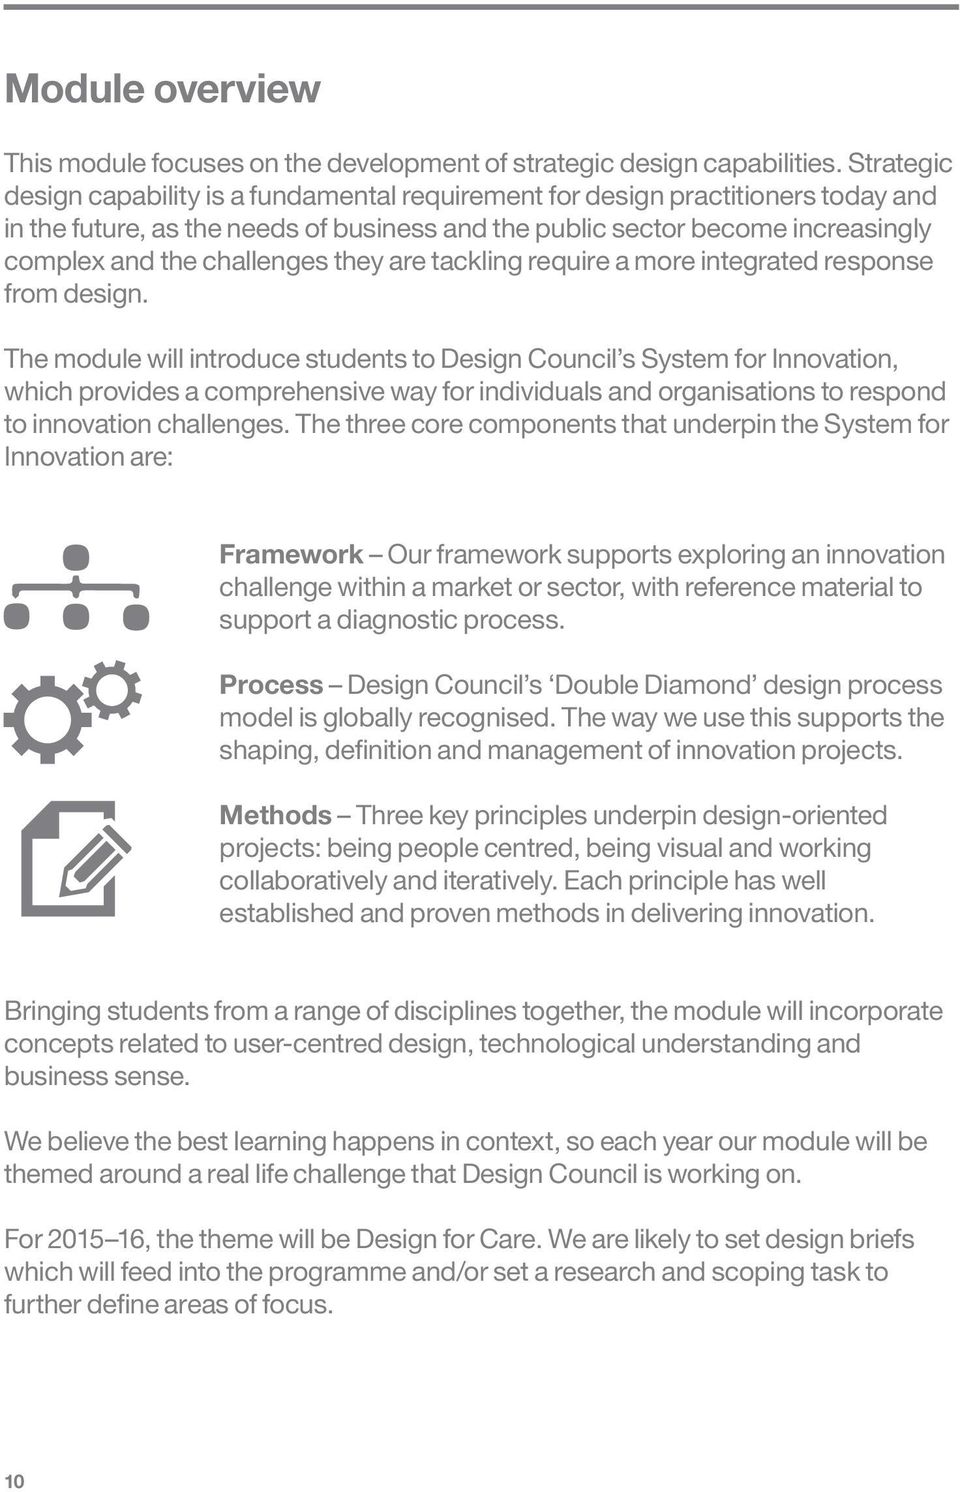 challenges they are tackling require a more integrated response from design.